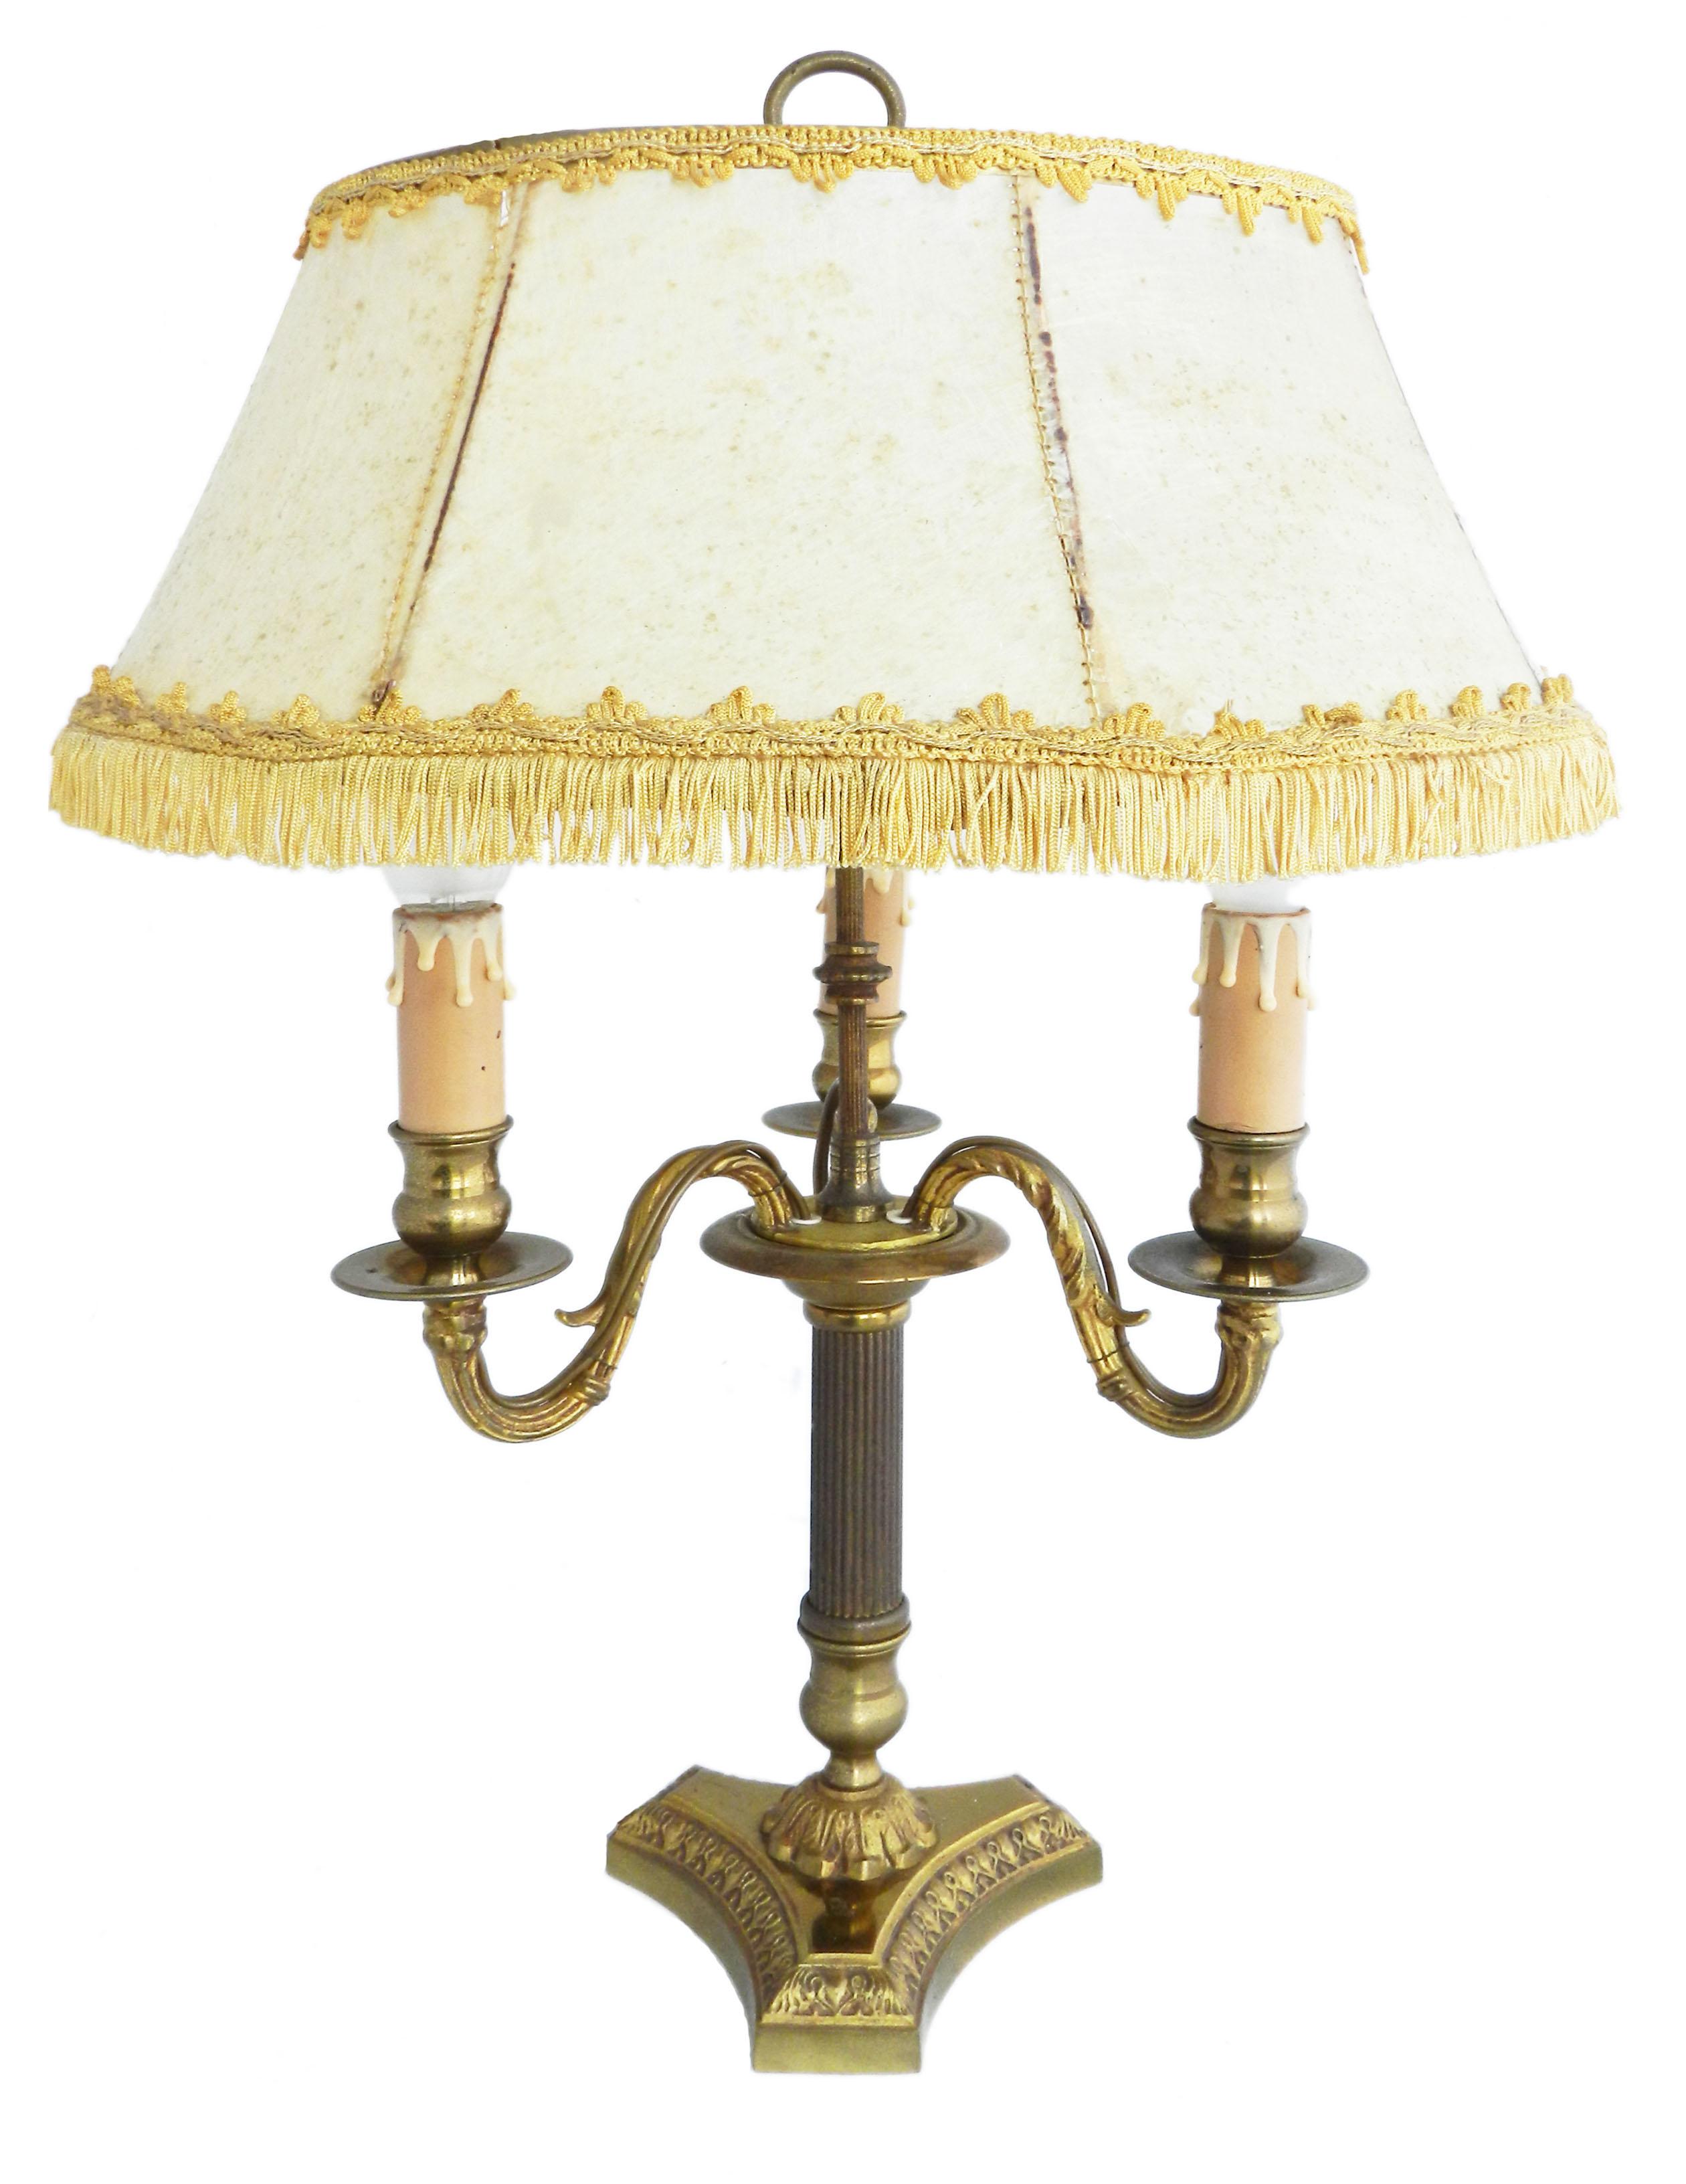 Louis XVI style table lamp, 20th century.
Very good quality heavy gilded brass
These can be rewired to USA or UK and EU standards
Shade if required needs to be recovered.







 